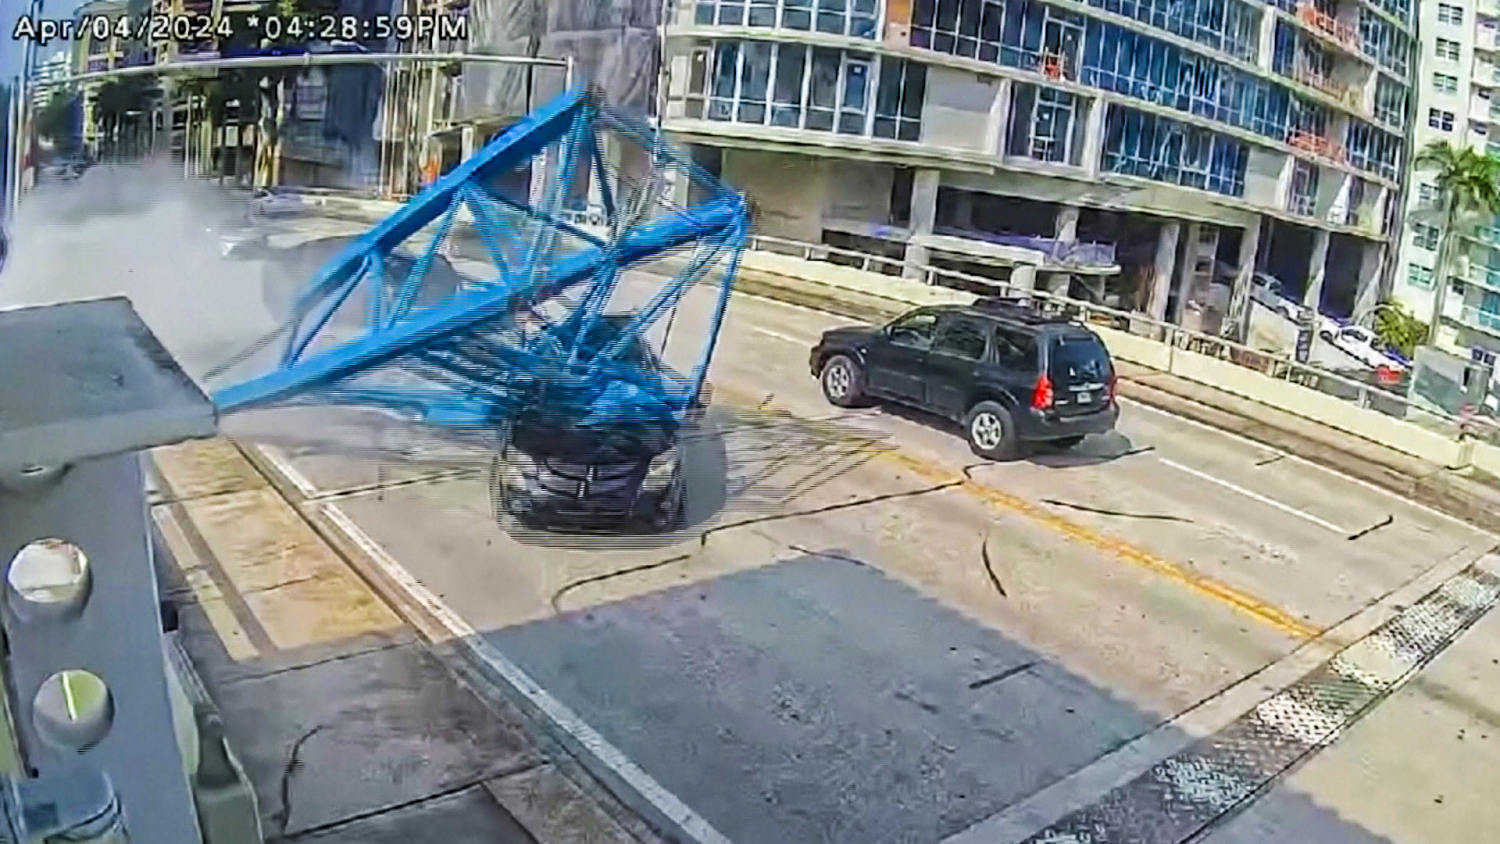 Videos show crane piece falling and crashing onto moving car in Fort Lauderdale 